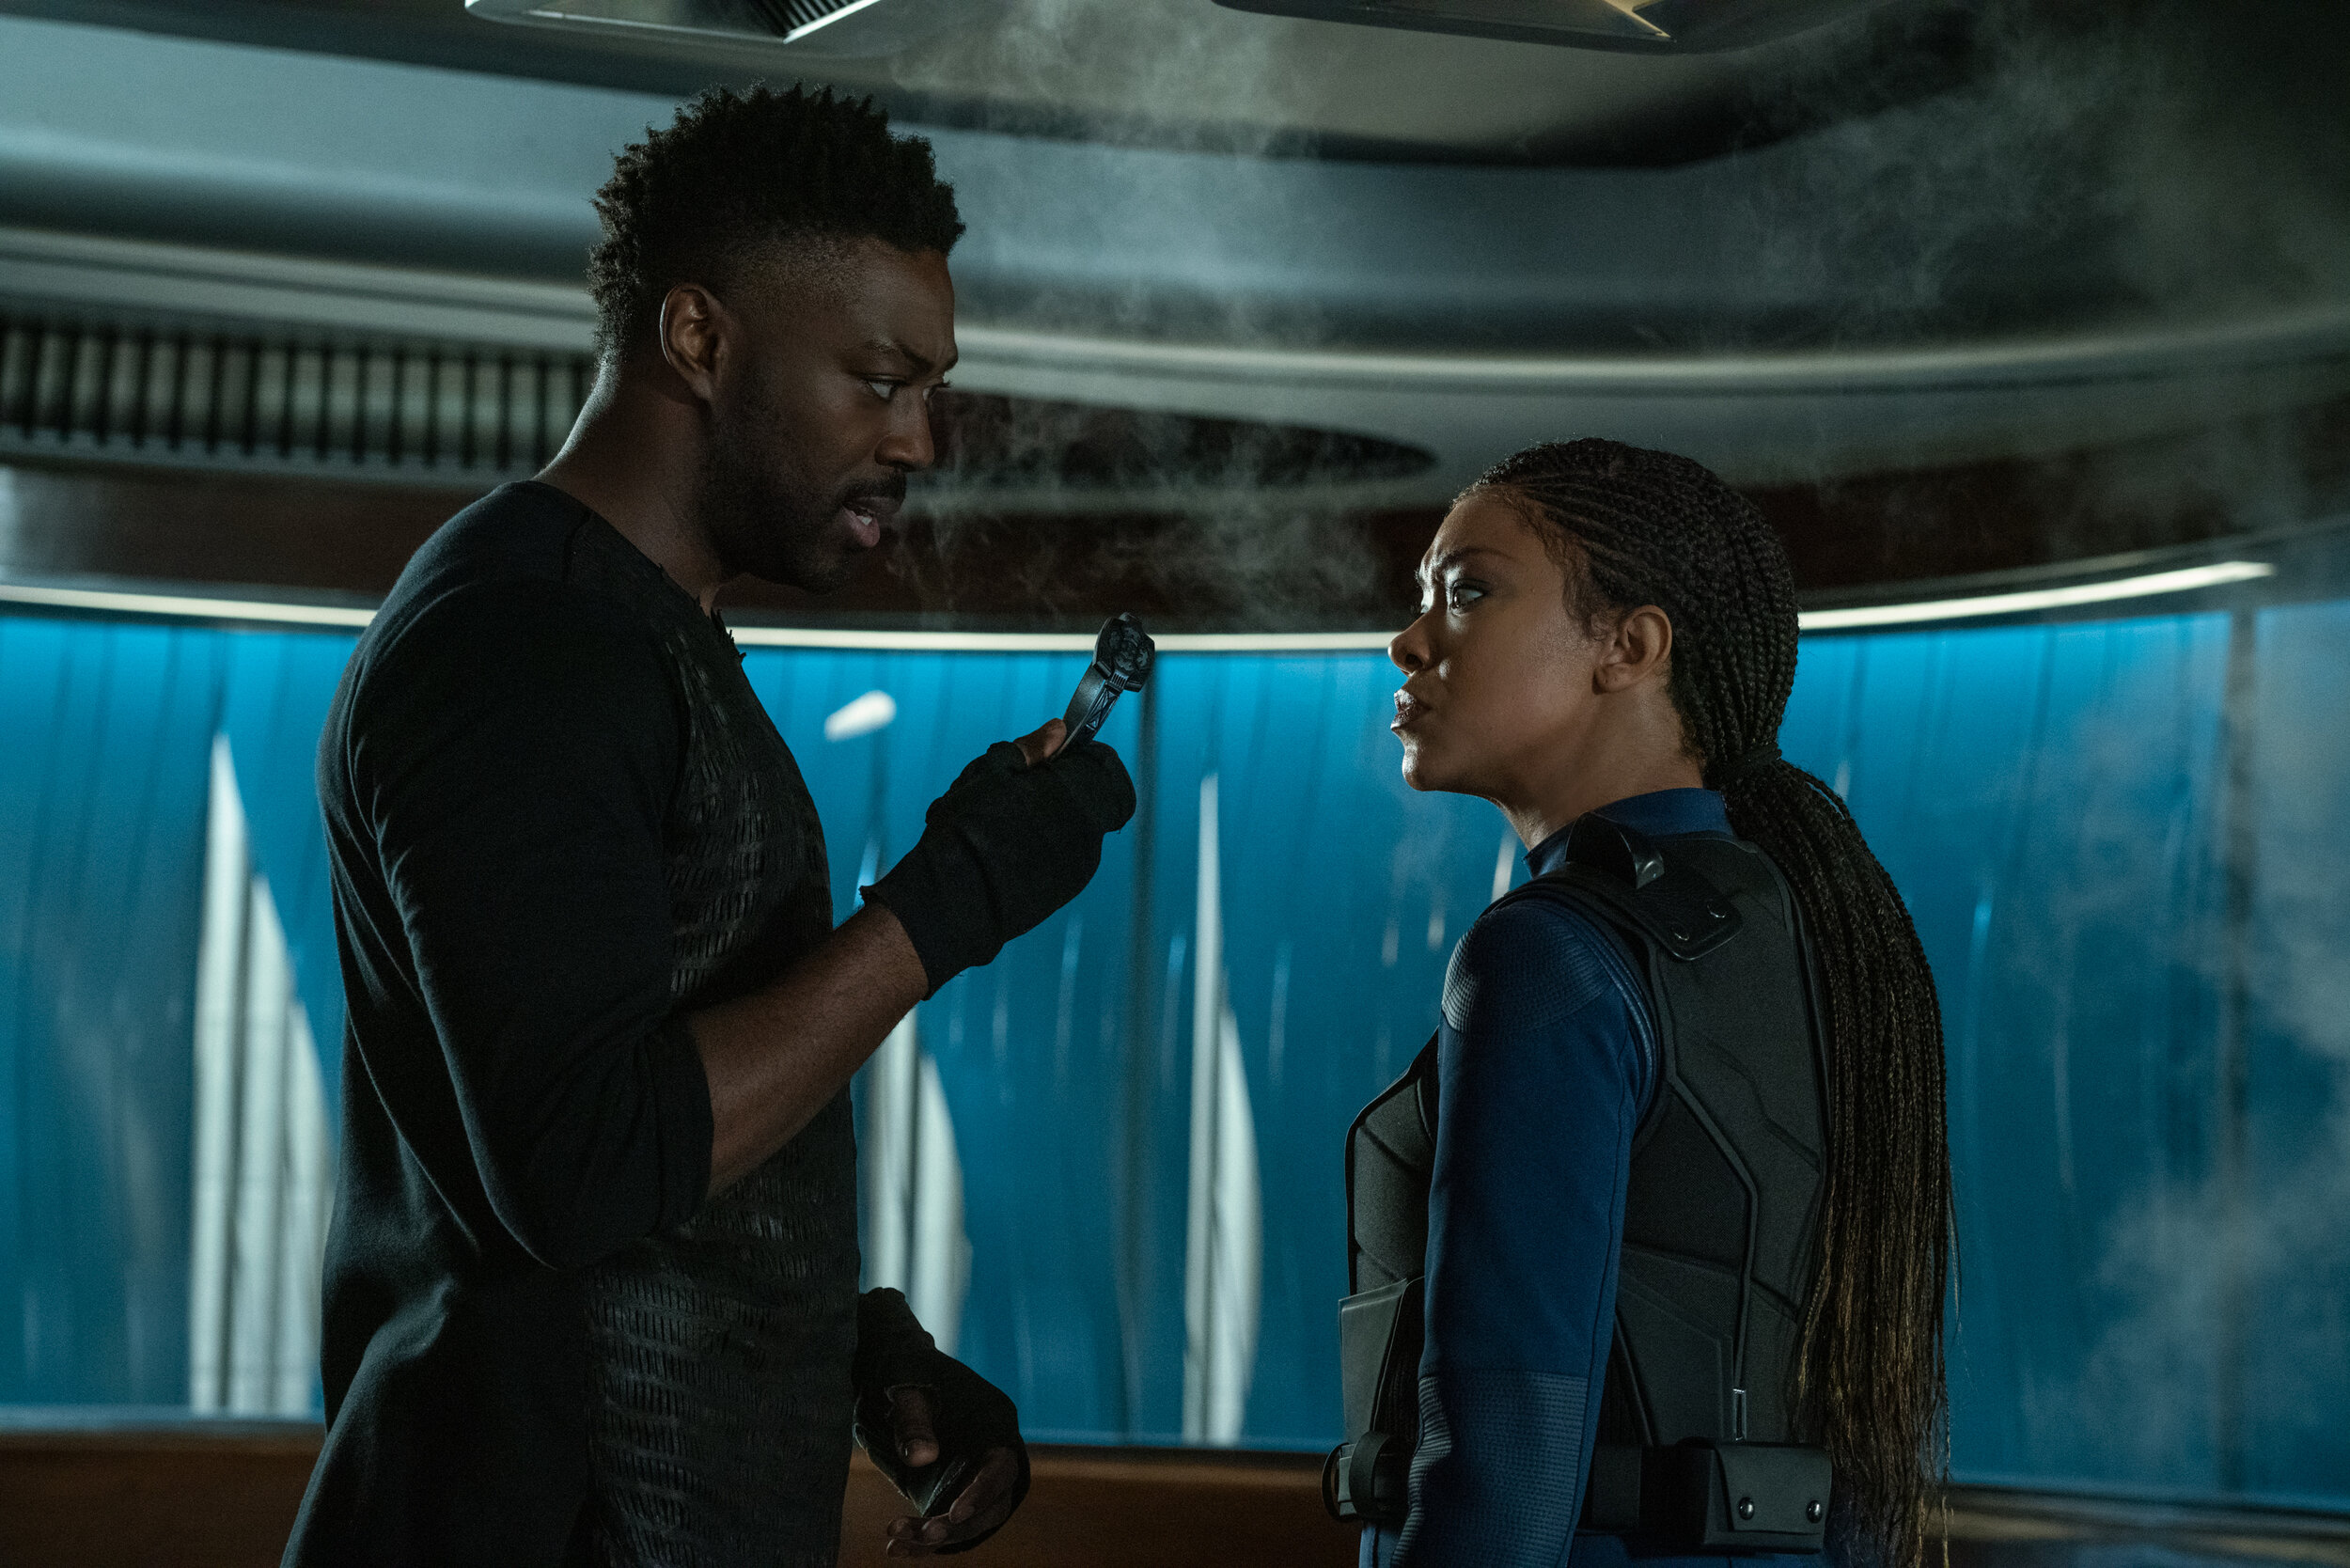   "There Is A Tide..." -- Ep#312 -- Pictured (L-R): David Ajala as Book and Sonequa Martin-Green as Commander Burnham of the CBS All Access series STAR TREK: DISCOVERY. Photo Cr: Michael Gibson/CBS ©2020 CBS Interactive, Inc. All Rights Reserved.  